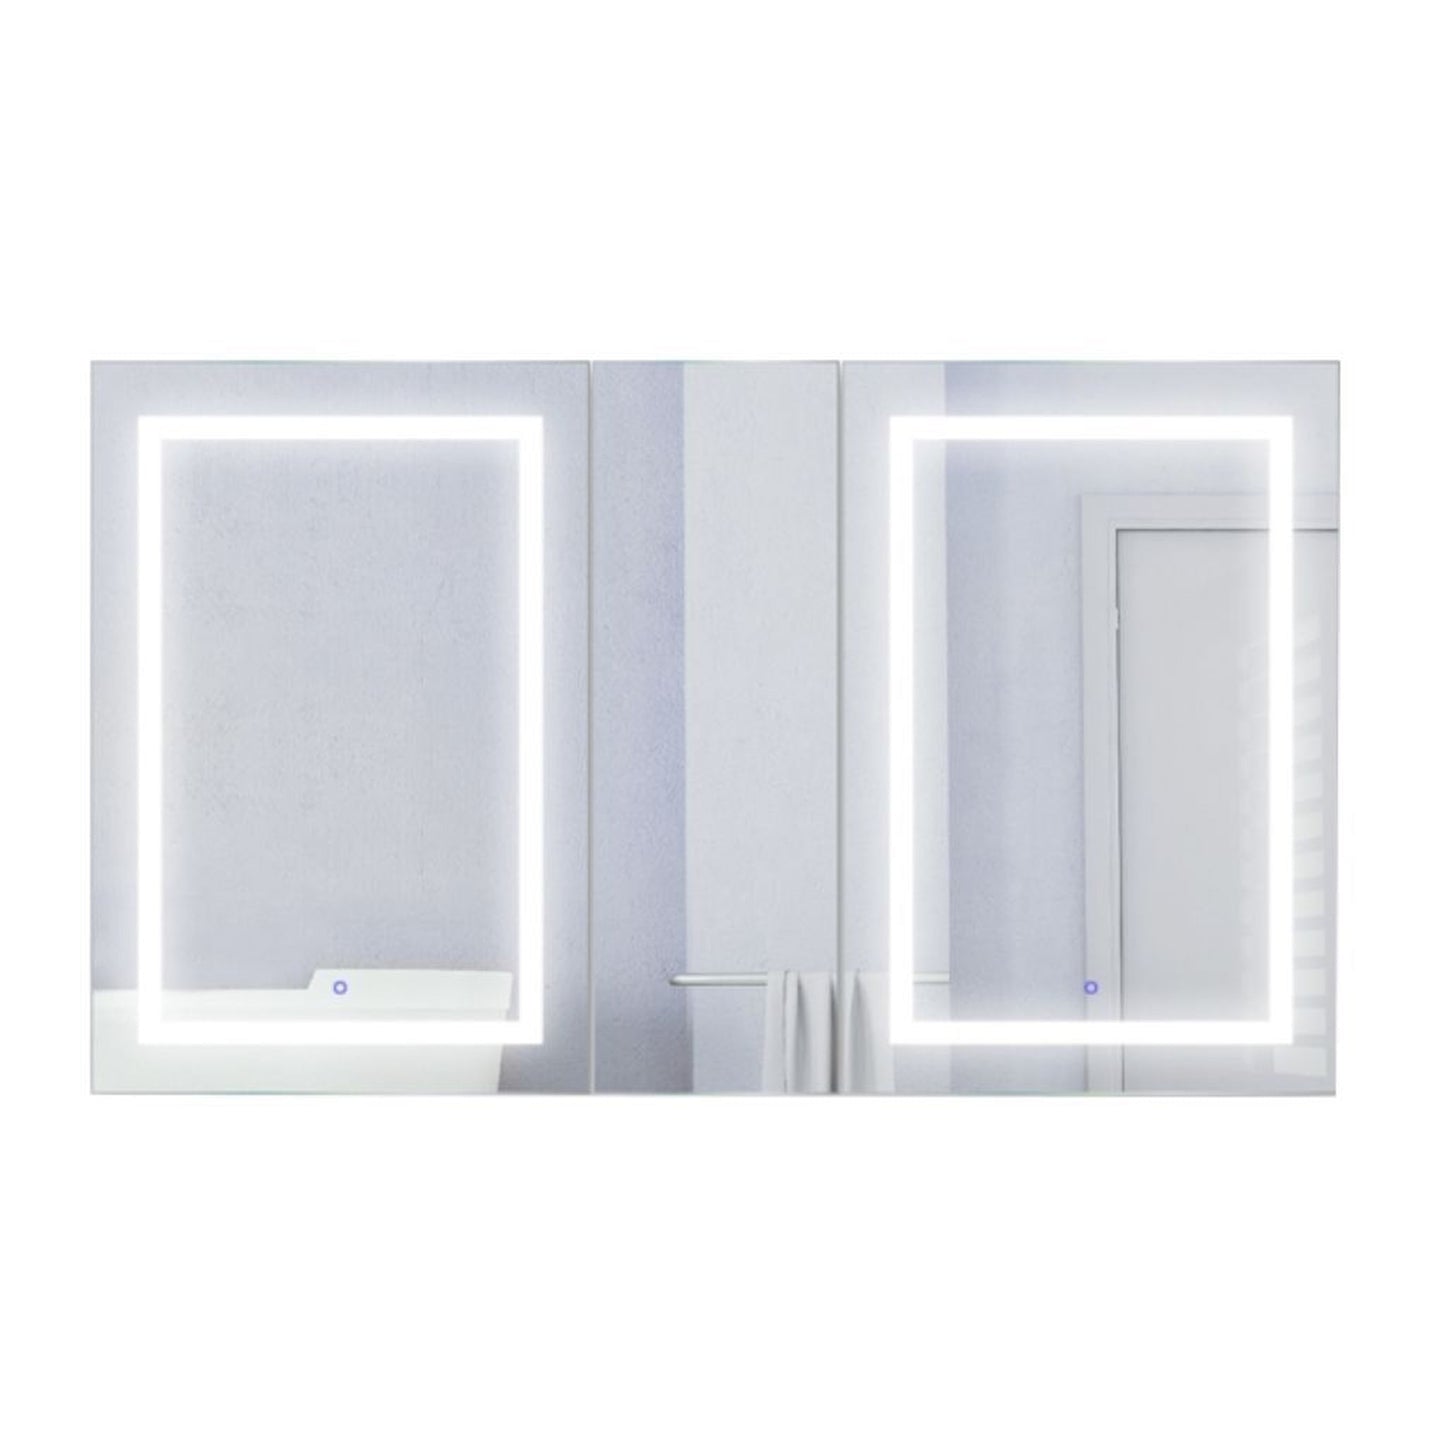 Krugg Reflections Svange 60" x 36" 5000K Double Left-Left-Right Opening Recessed/Surface-Mount Illuminated Silver Backed LED Medicine Cabinet Mirror With Built-in Defogger, Dimmer and Electrical Outlet